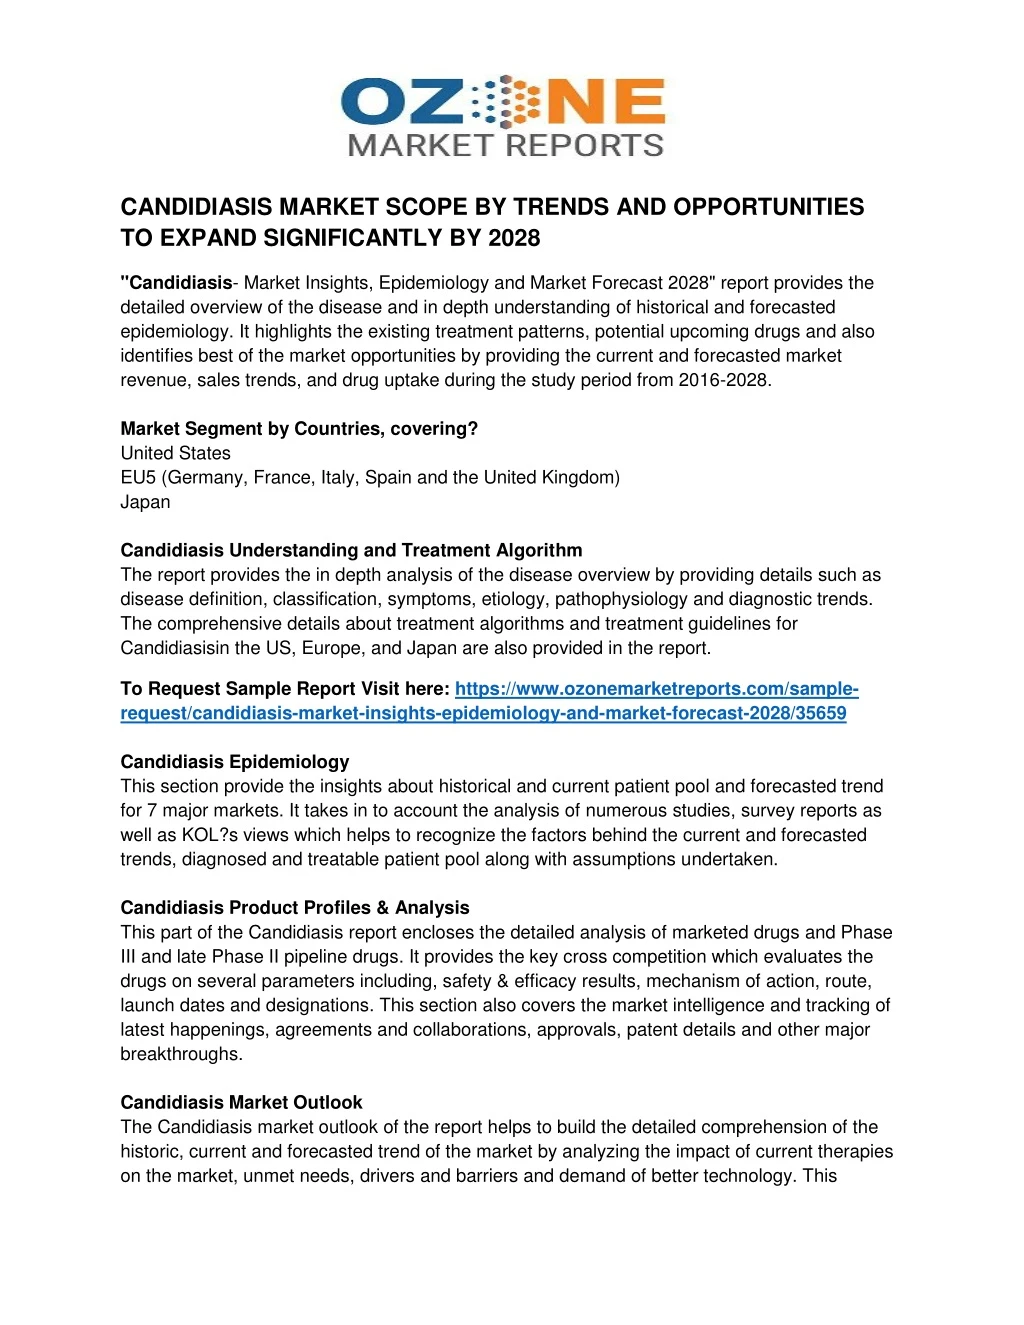 candidiasis market scope by trends